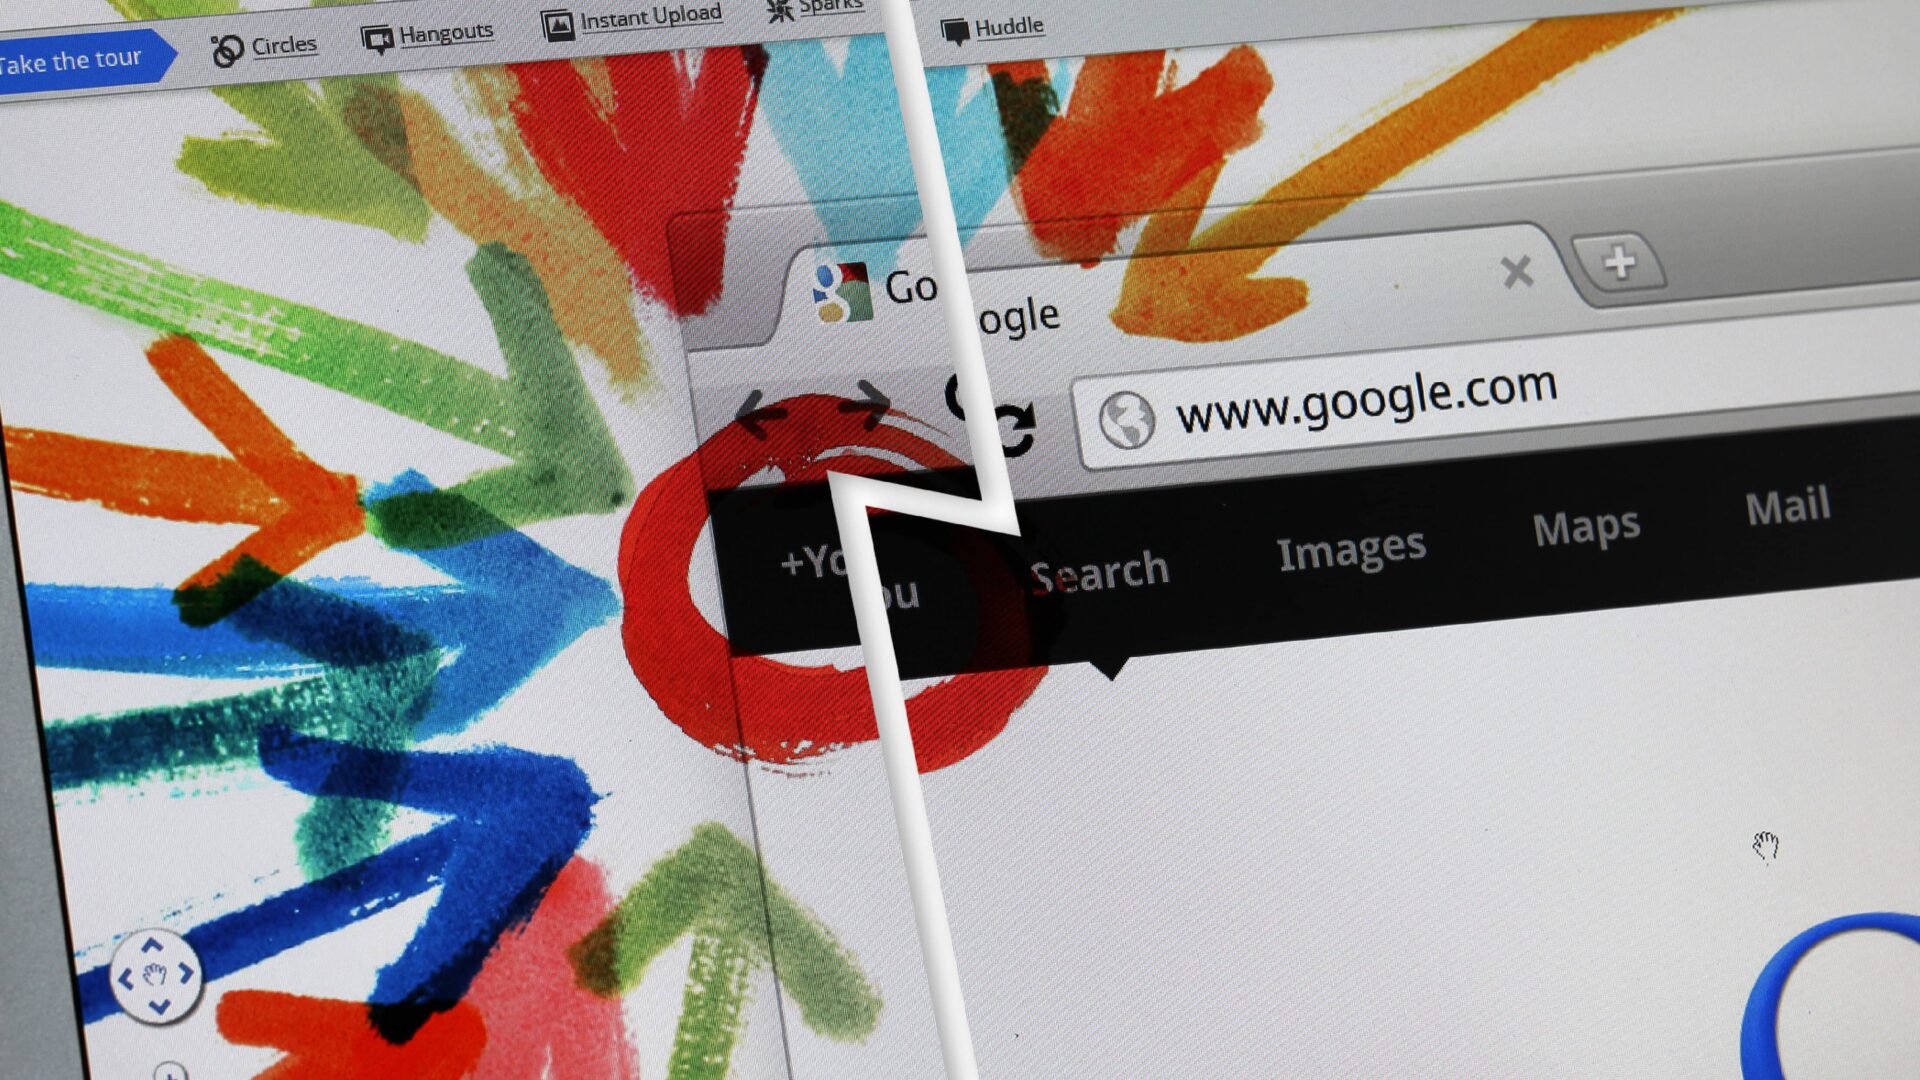 A screenshot of Google+ with arrows pointing to the G.